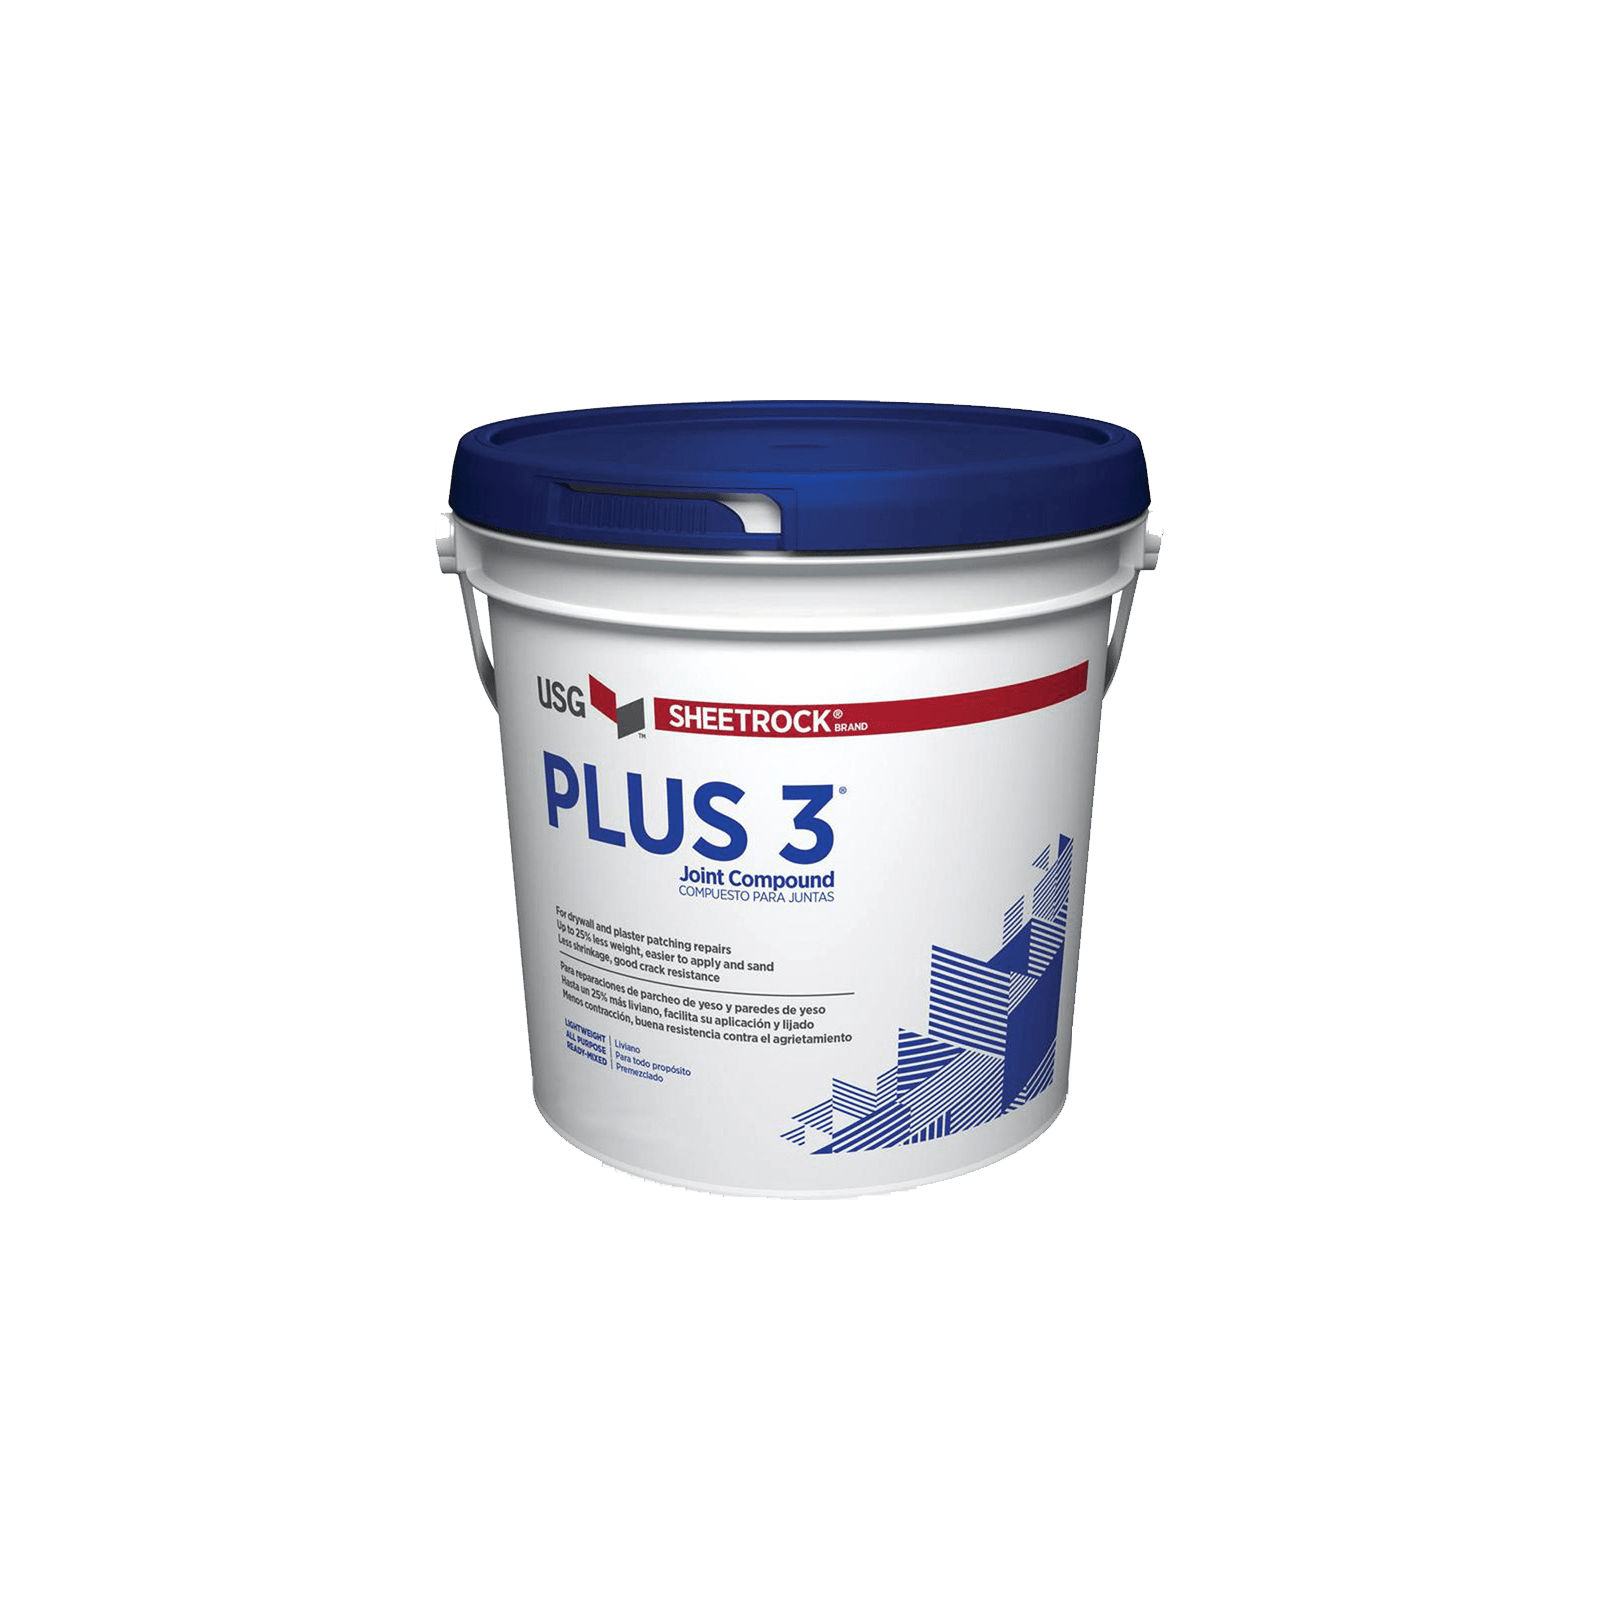 USG Joint Compound - Rossi Paint Stores - Blue Top - 4.5 Gallons